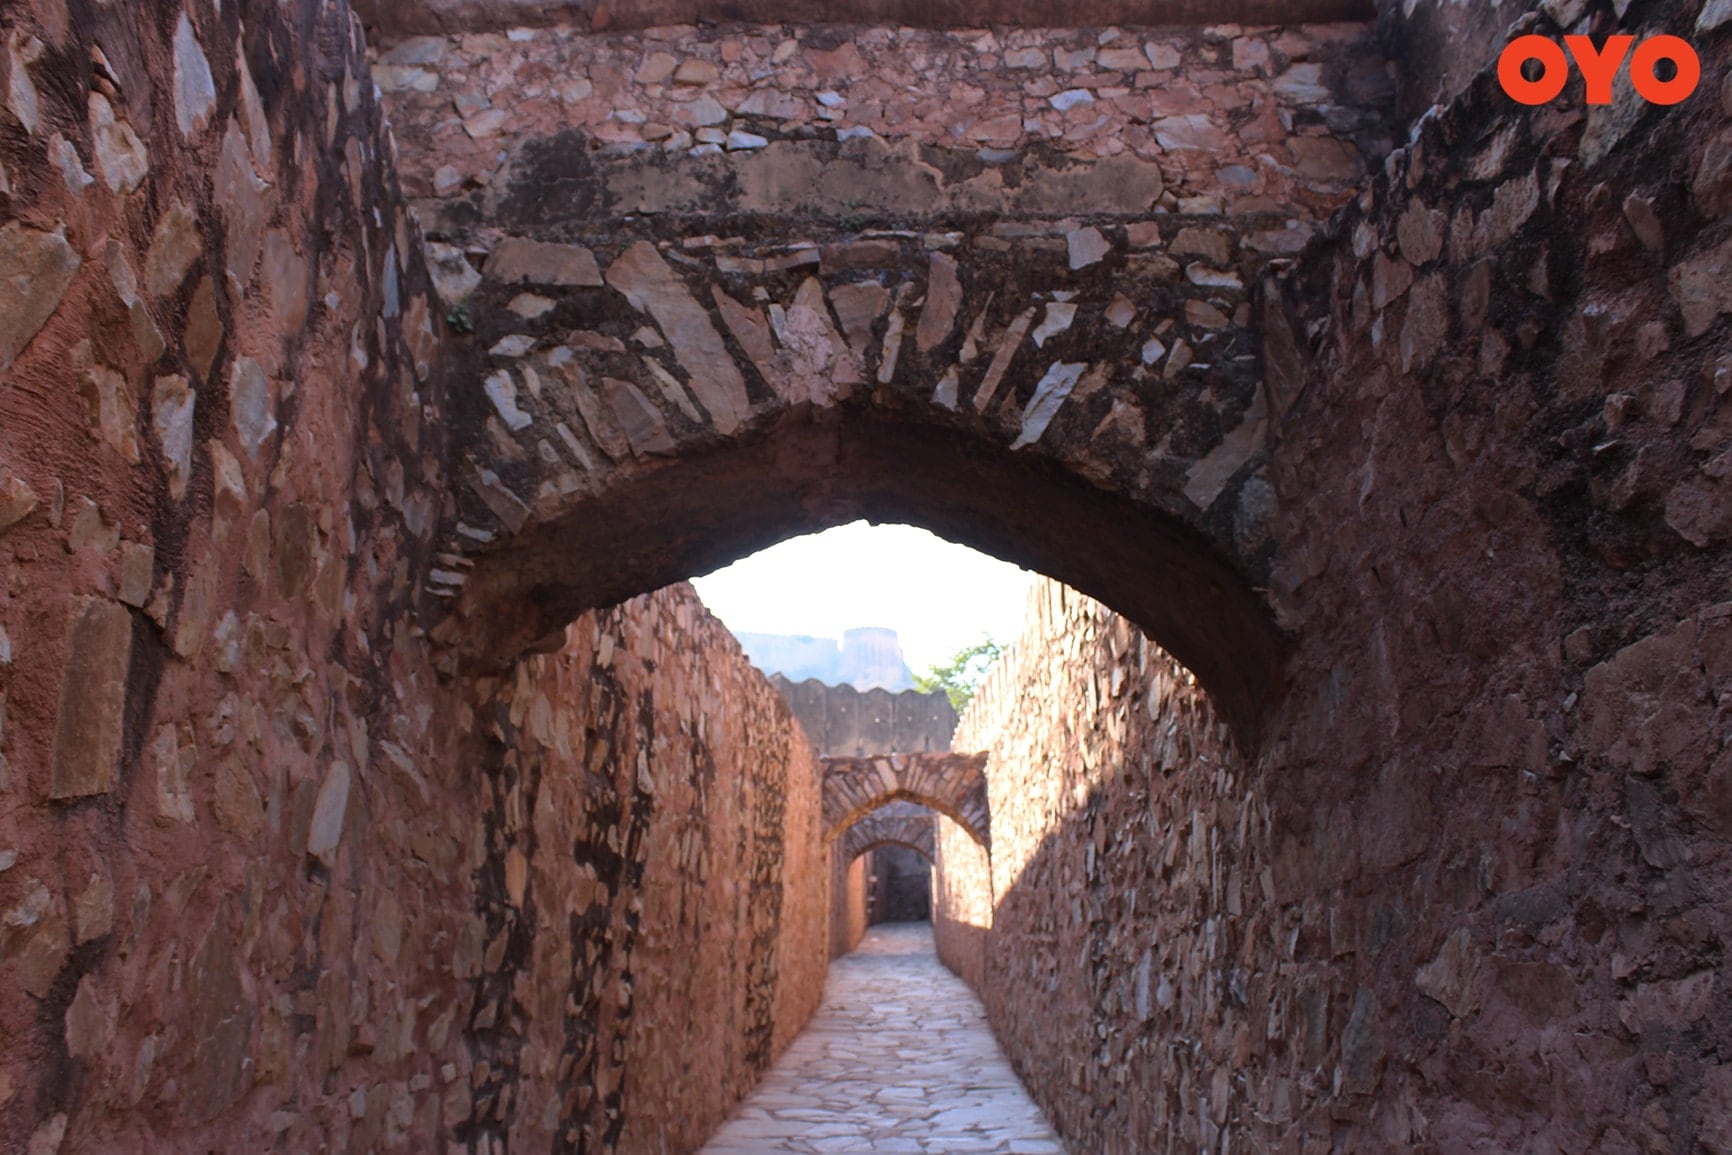 Enroute Jaigarh Fort from the secret passage